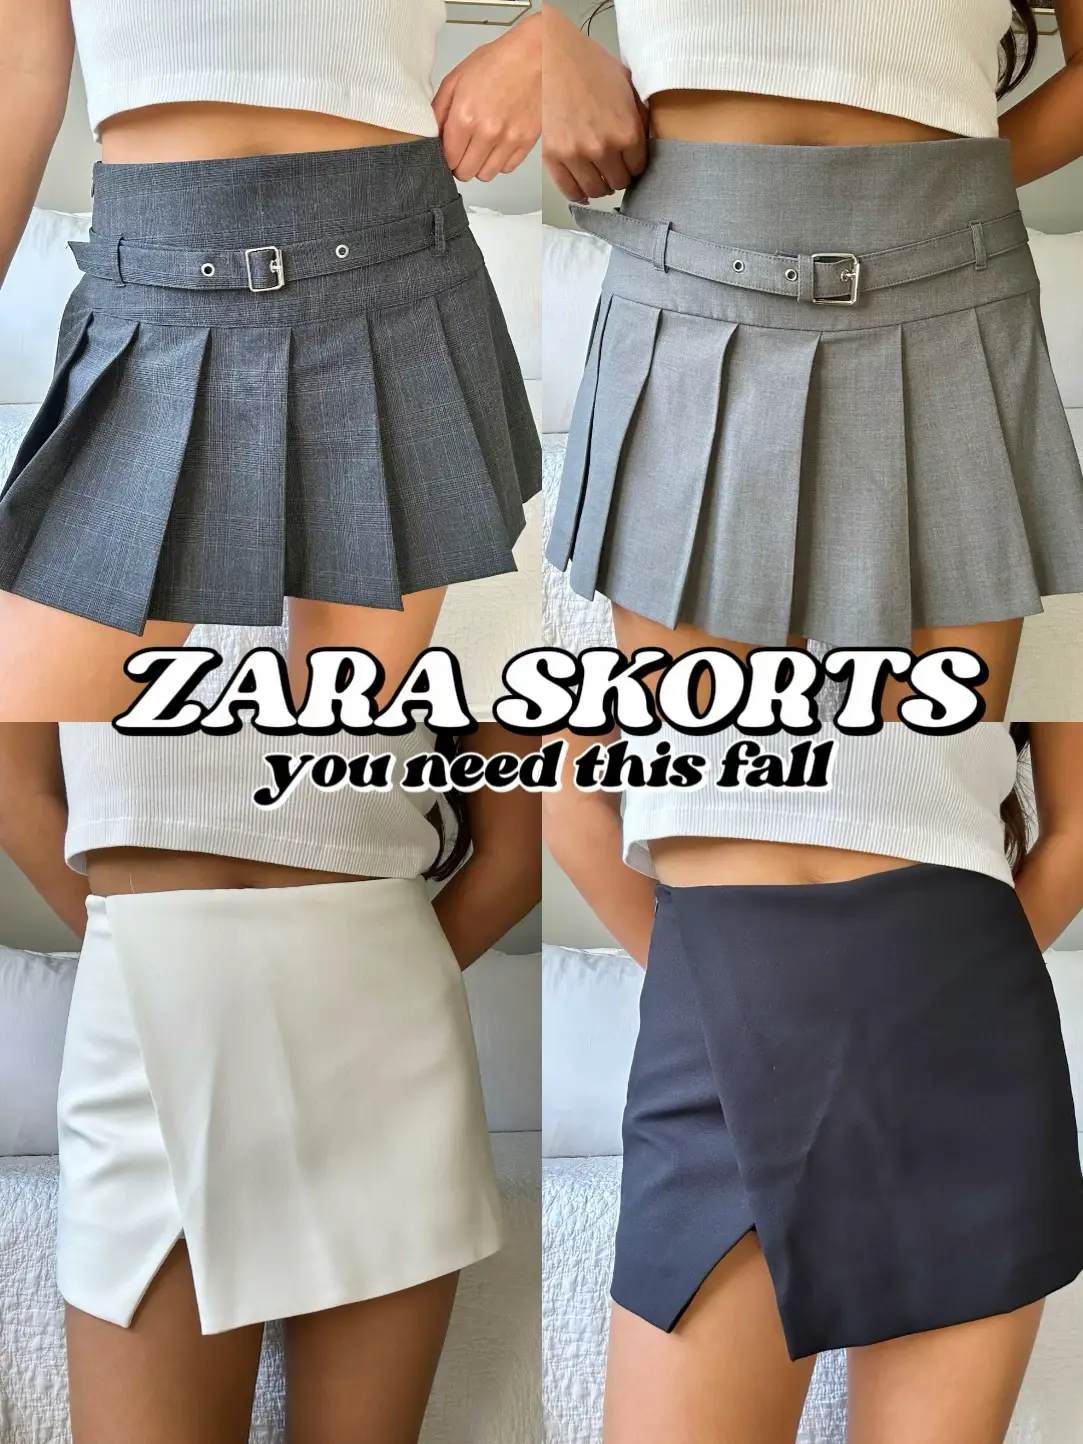 ZARA SKORTS YOU NEED THIS FALL, Gallery posted by riannagail